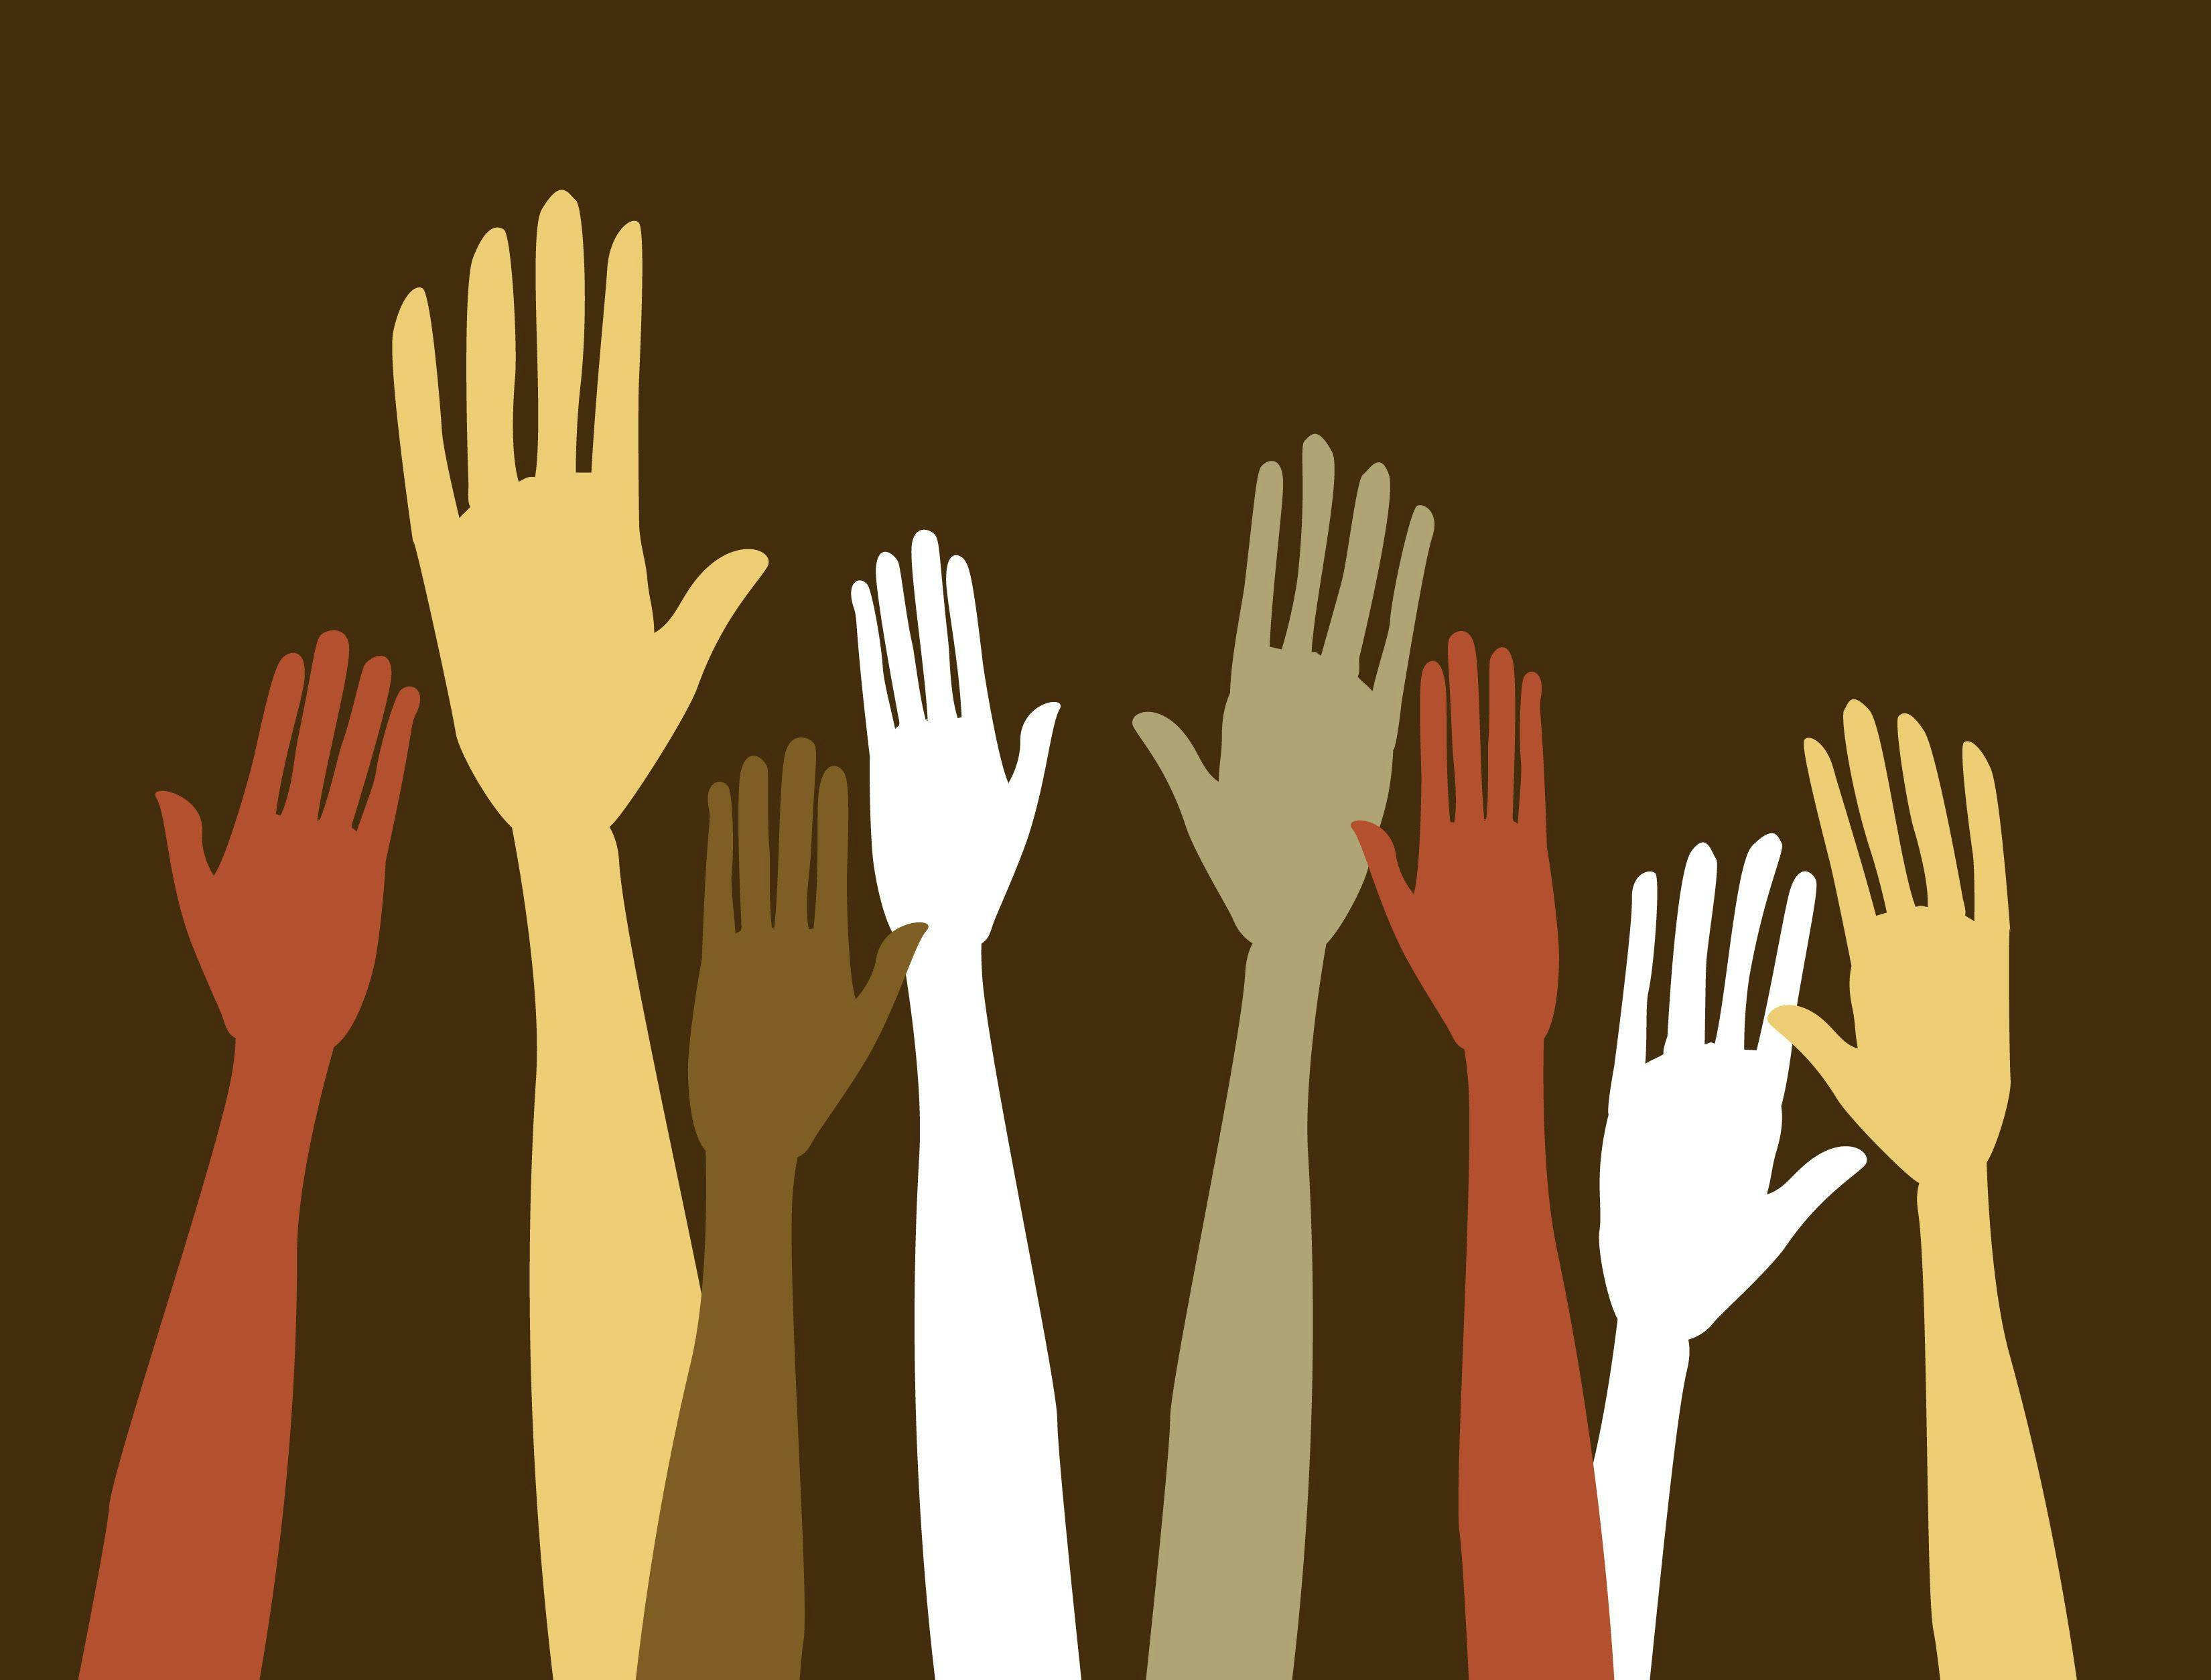 Hands raised of diverse individuals.